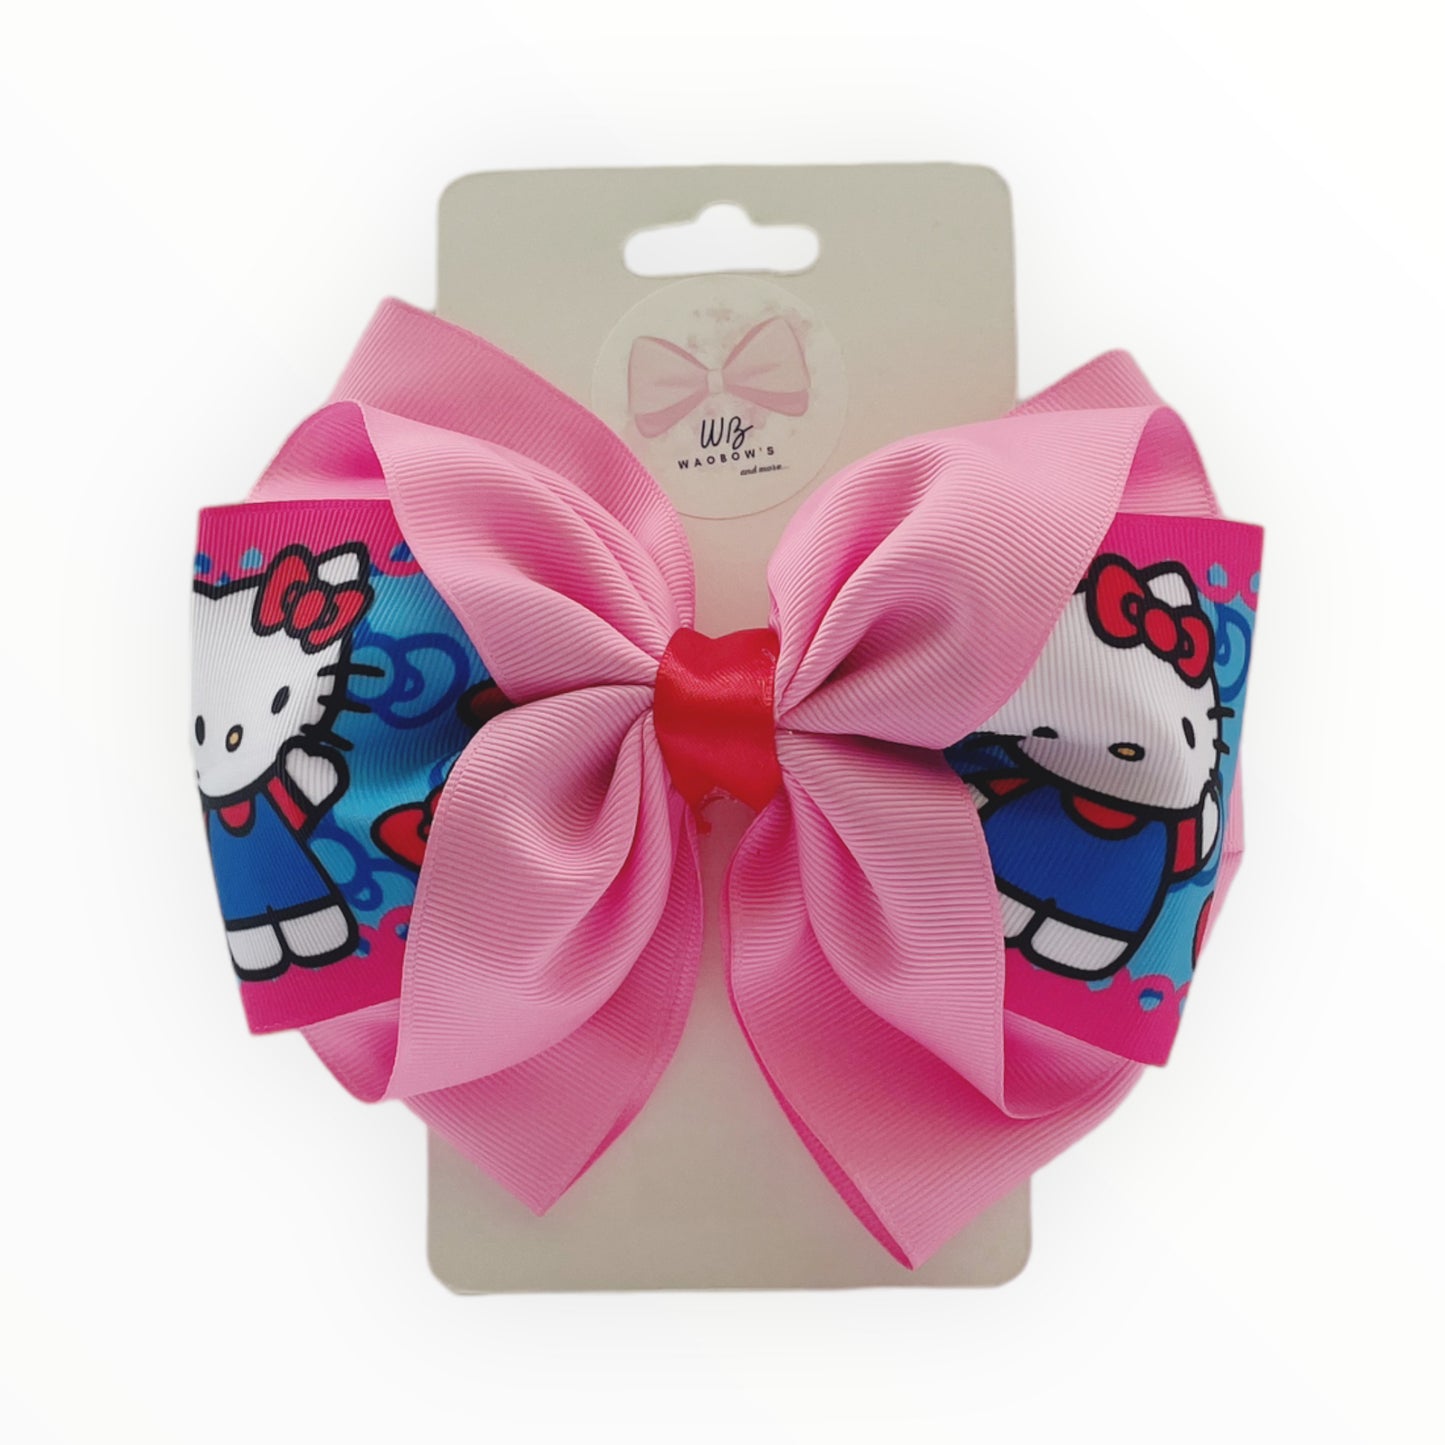 Backpack and bow Hello Kitty Bundle